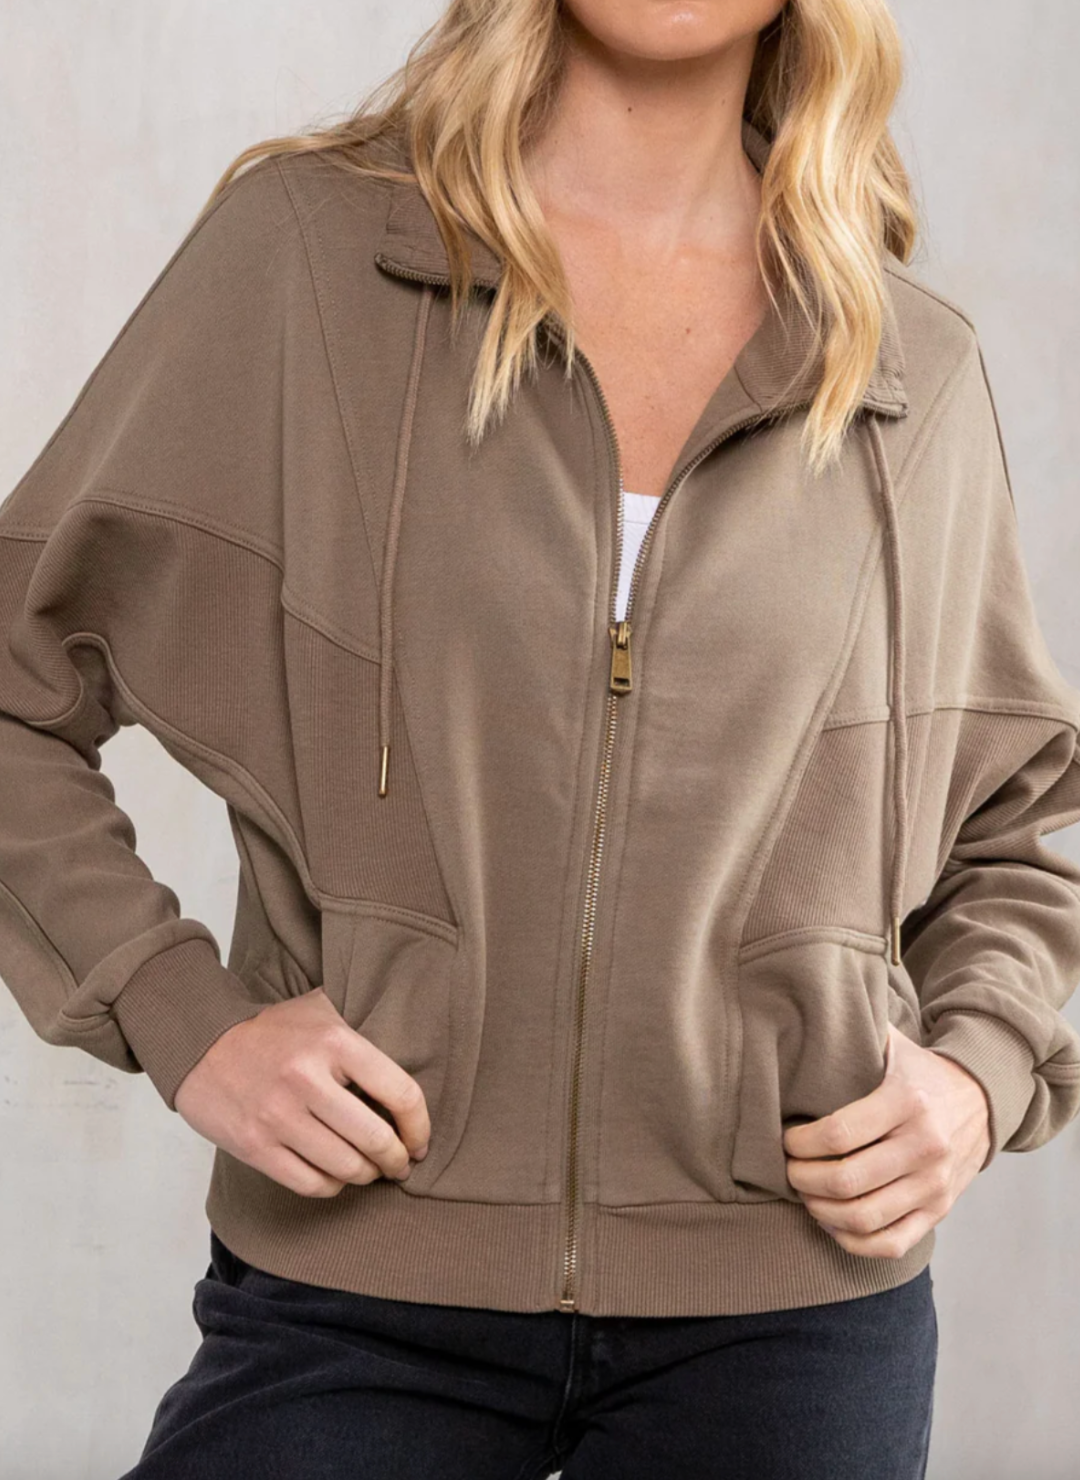 Front view of the model wearing the LS Vivian Vintage Wash Zip up Sweatshirt showing it has a zip closure. The model is showing that it has front pockets. Showing the texture and different pattern of the sweatshirt.